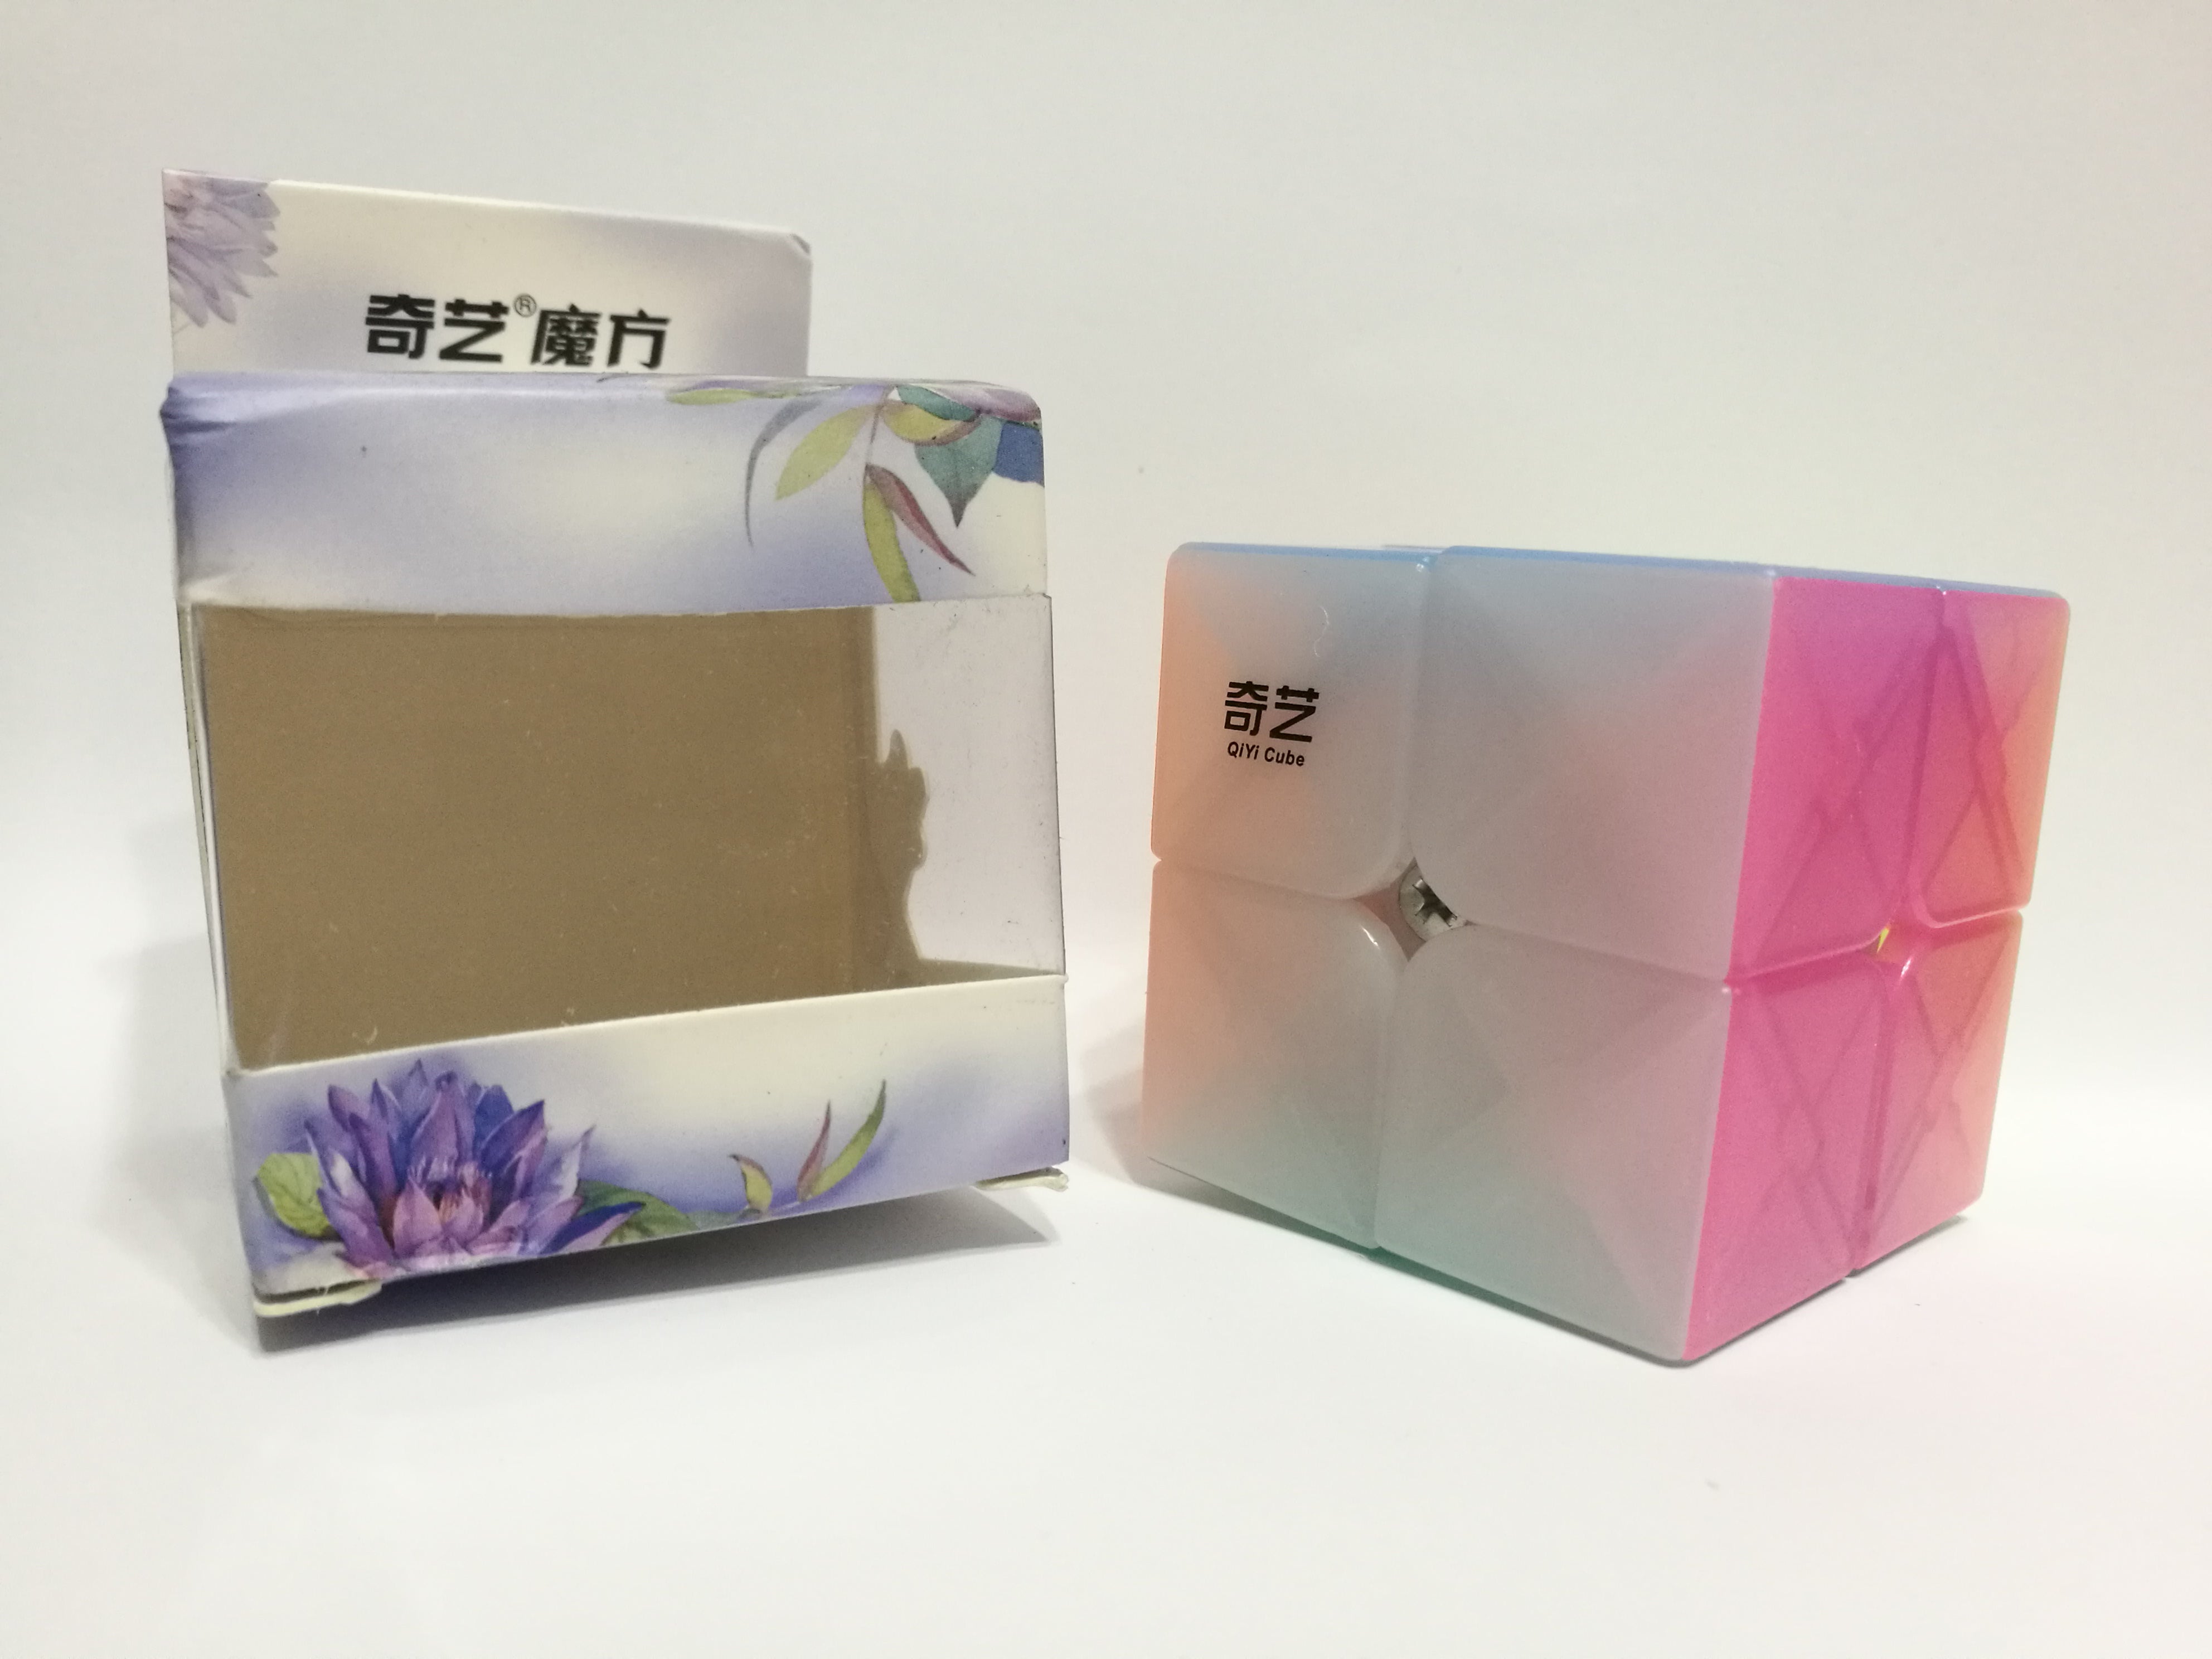 QiYi Jelly Cubes - CuberSpace